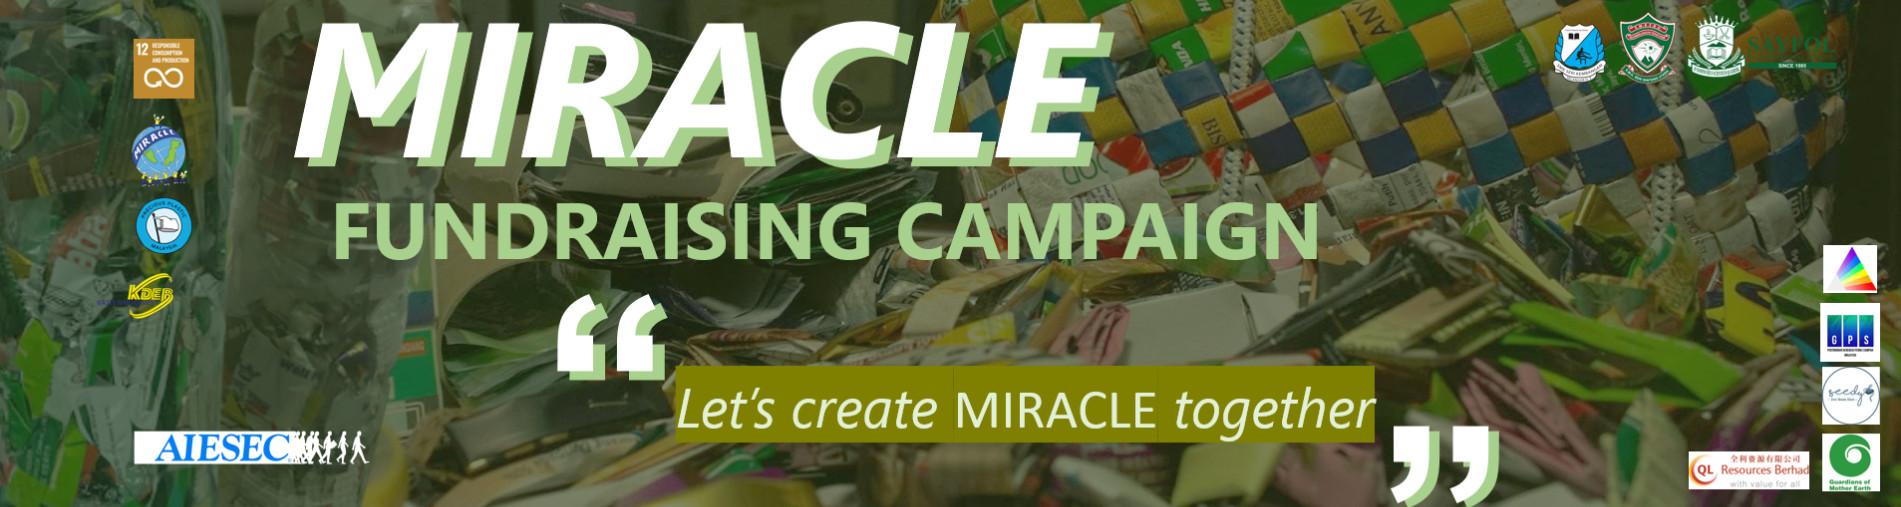 Zero Waste Miracle Fundraising  Campaign